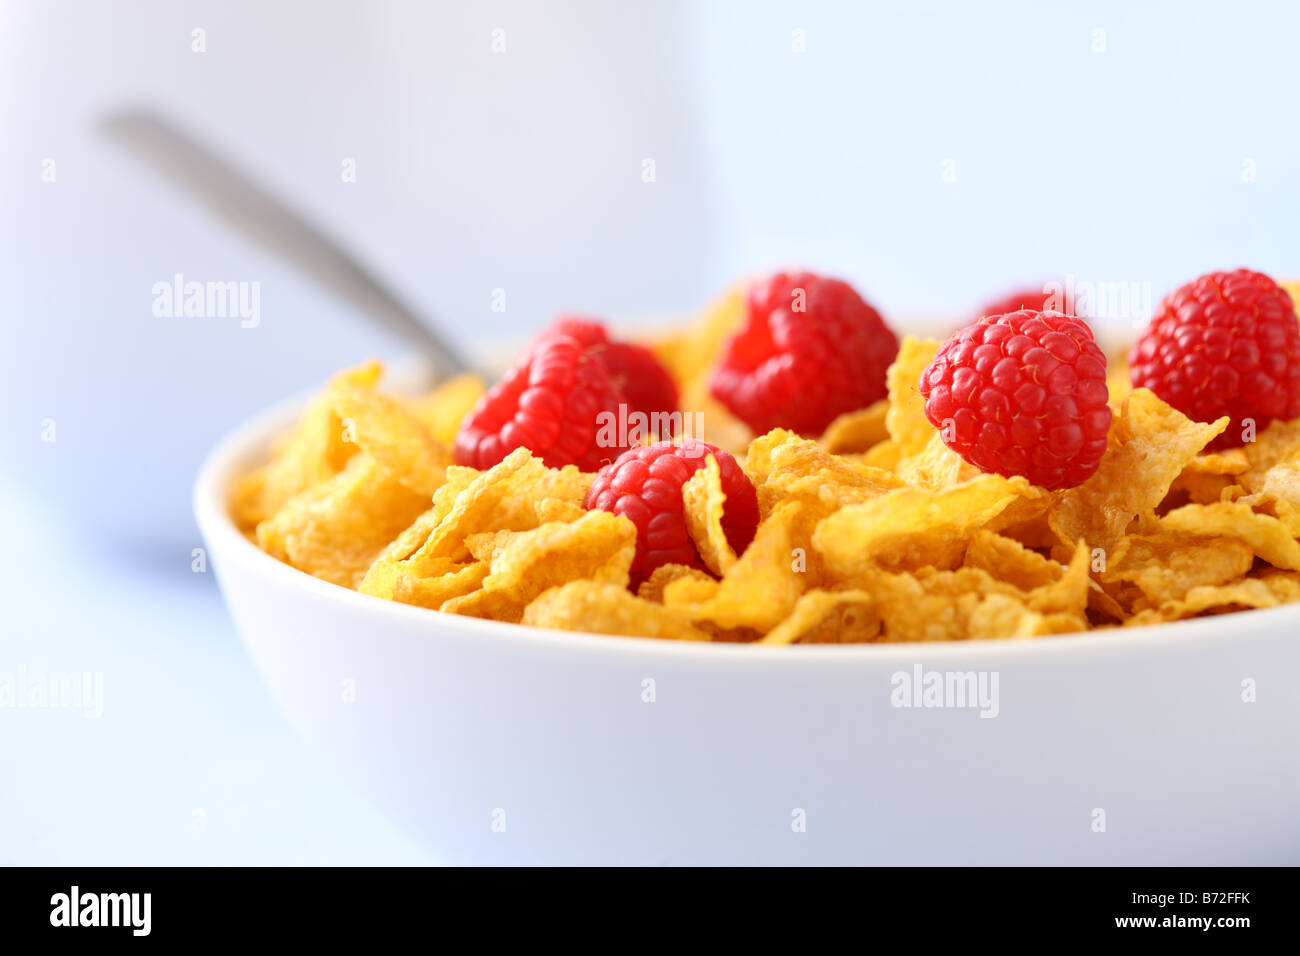 Cereal with berries healthy breakfast Stock Photo